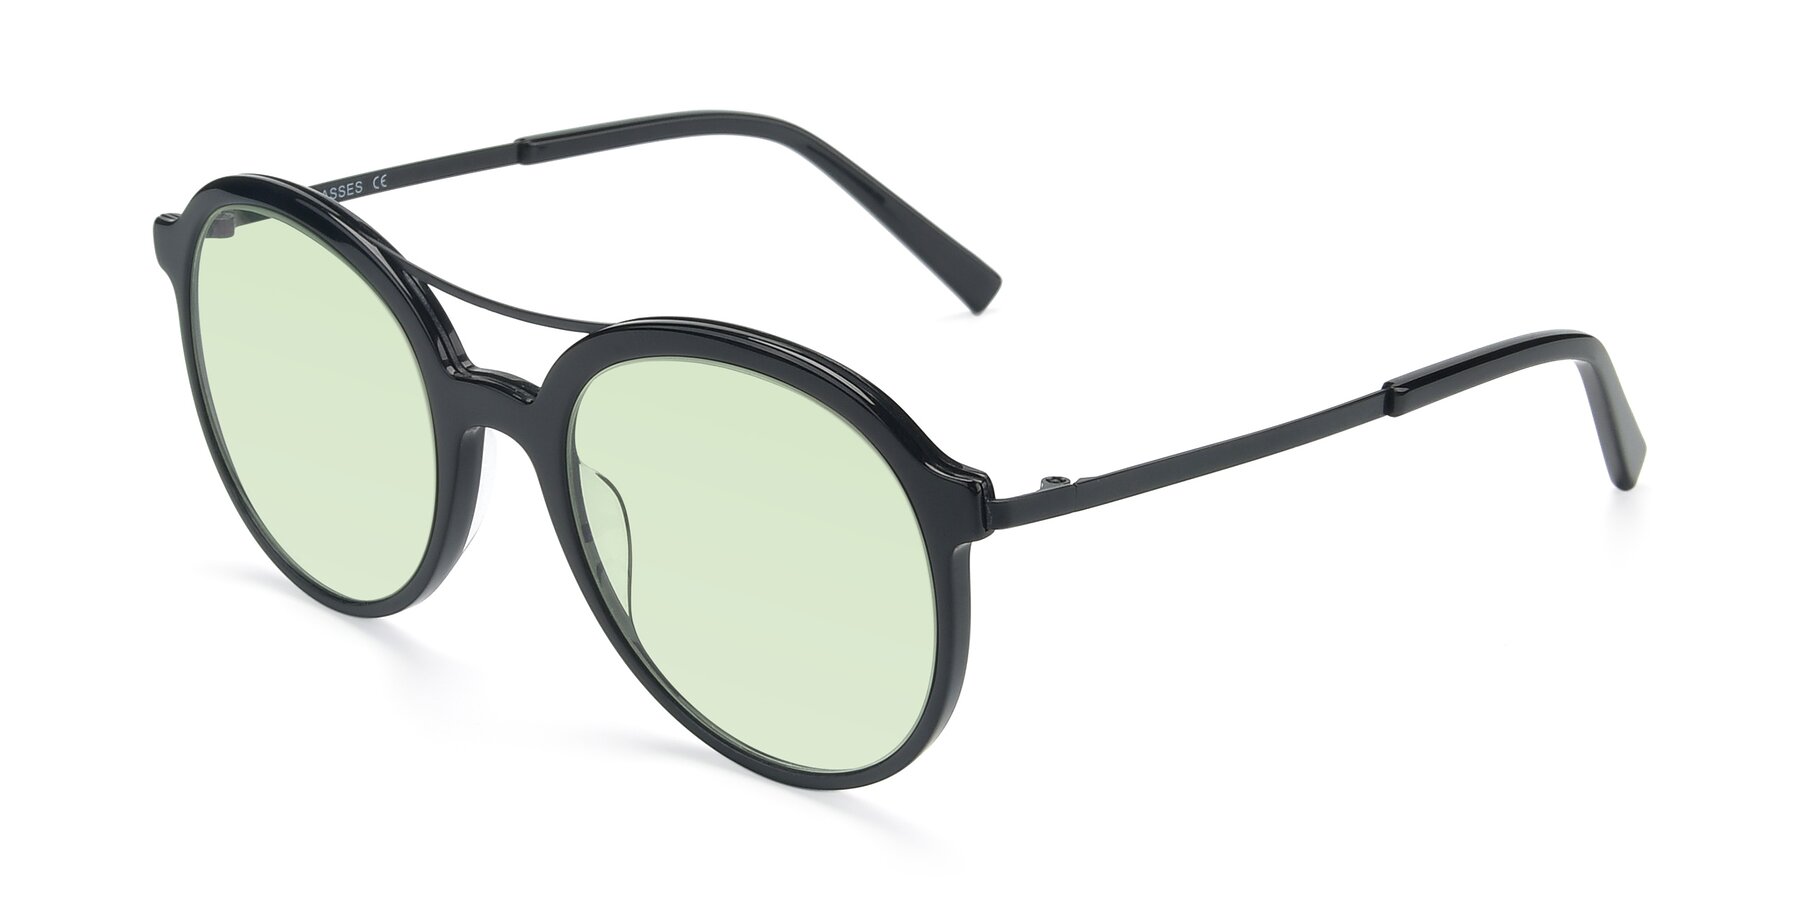 Angle of 17268 in Black with Light Green Tinted Lenses